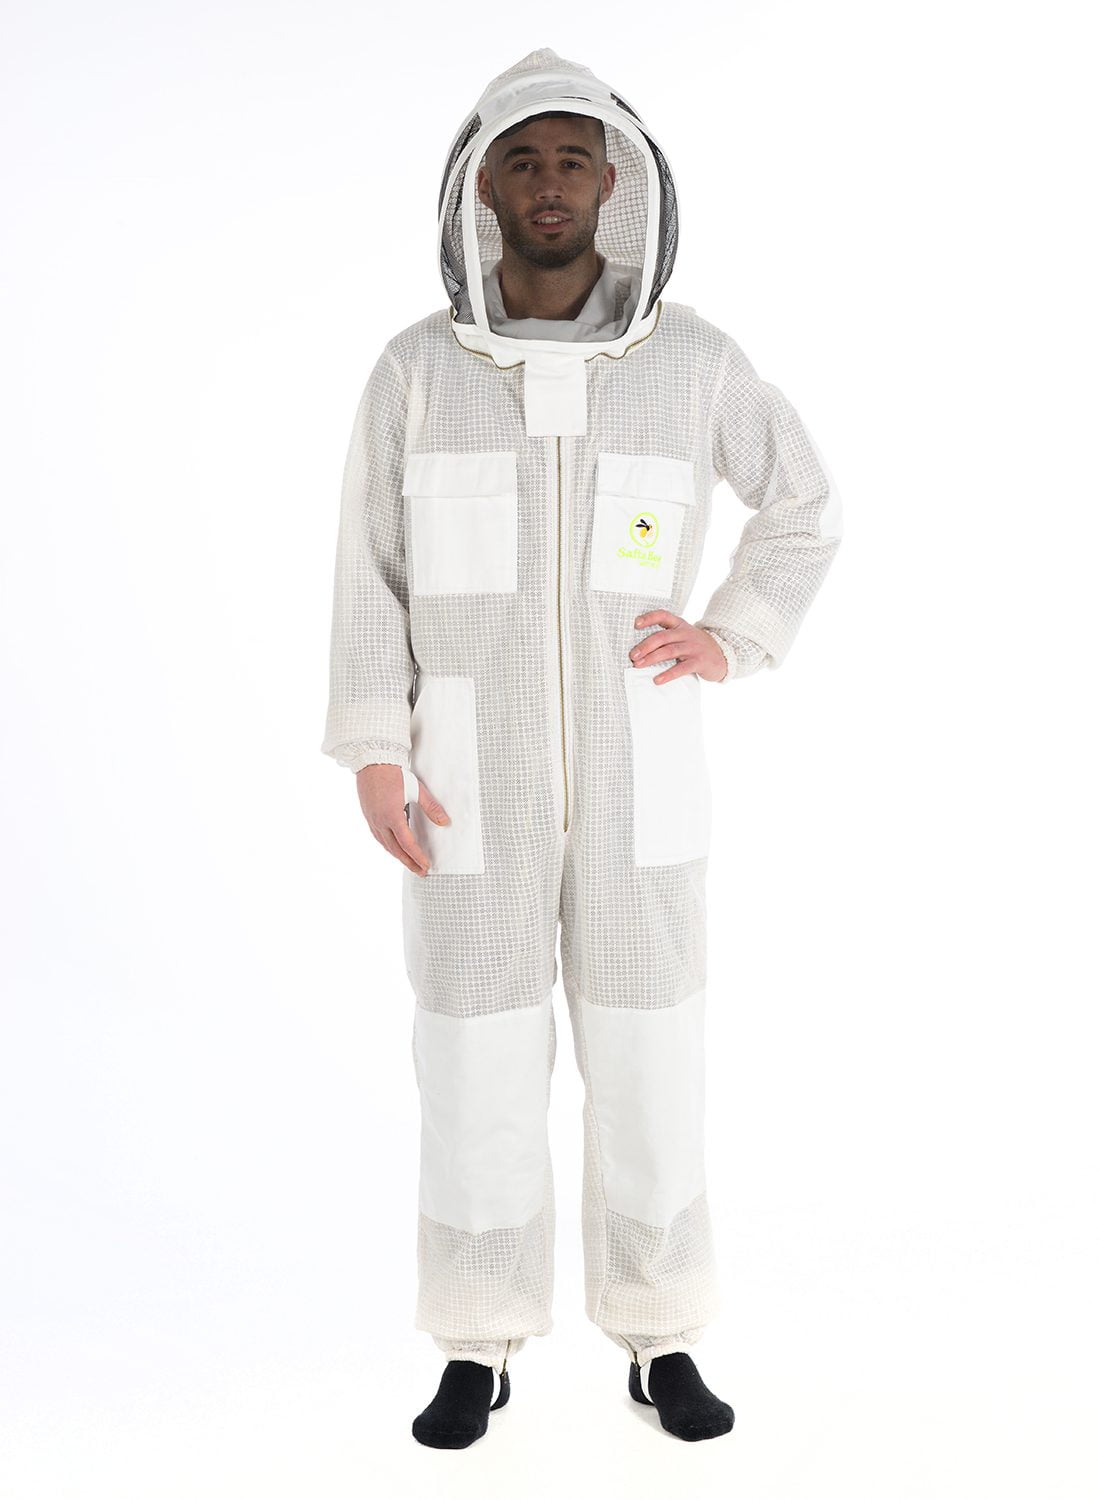 Details about   3 Layer Ultra Ventilated Pilot Beekeeping Suit Extra Ordinary features Size M 